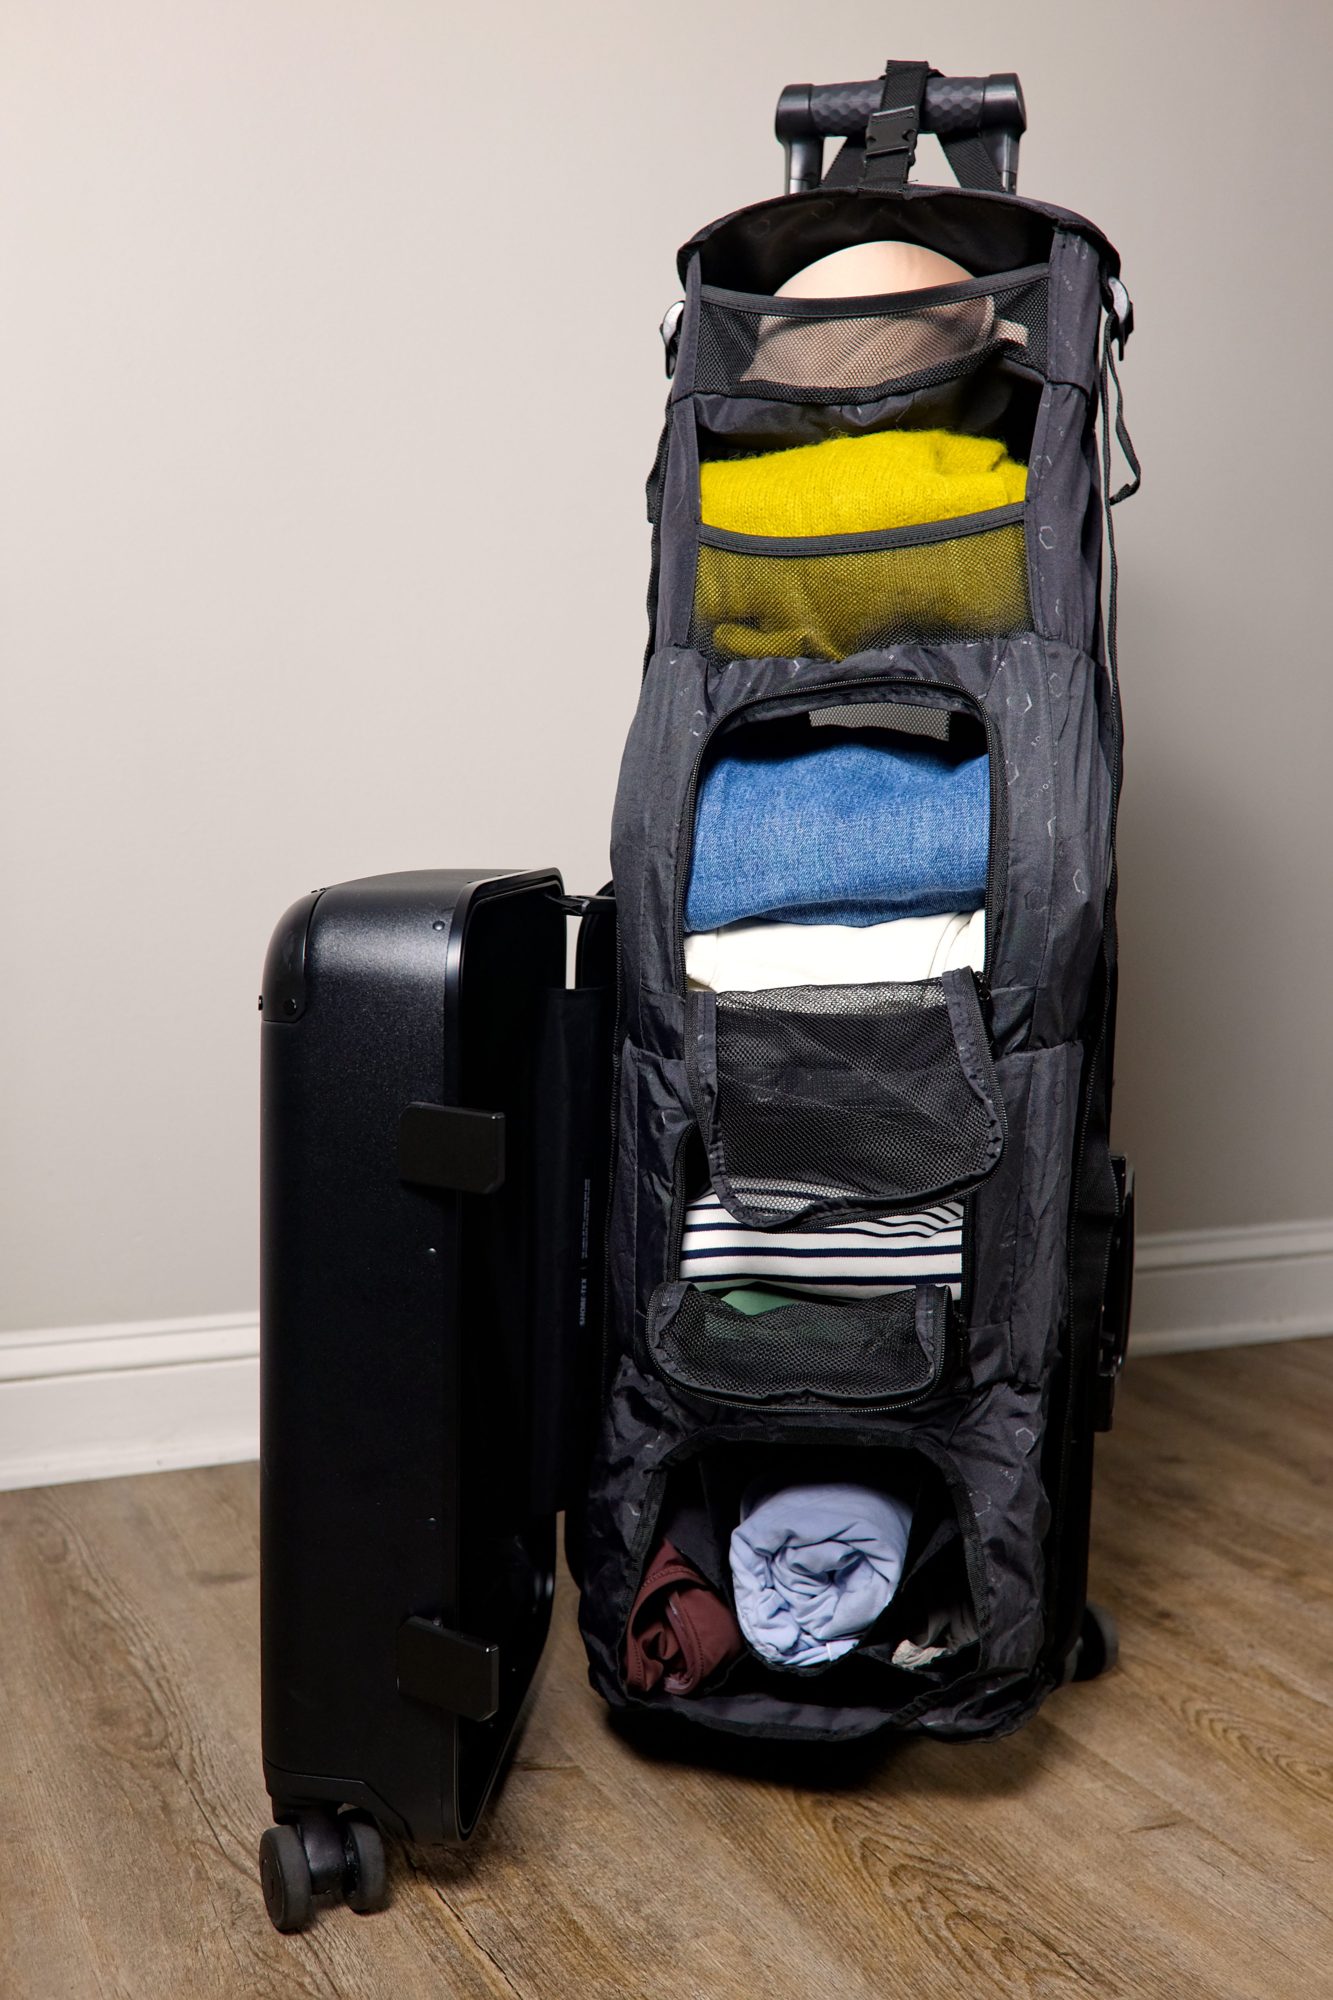 A carry-on closet with a weekend's worth of clothing